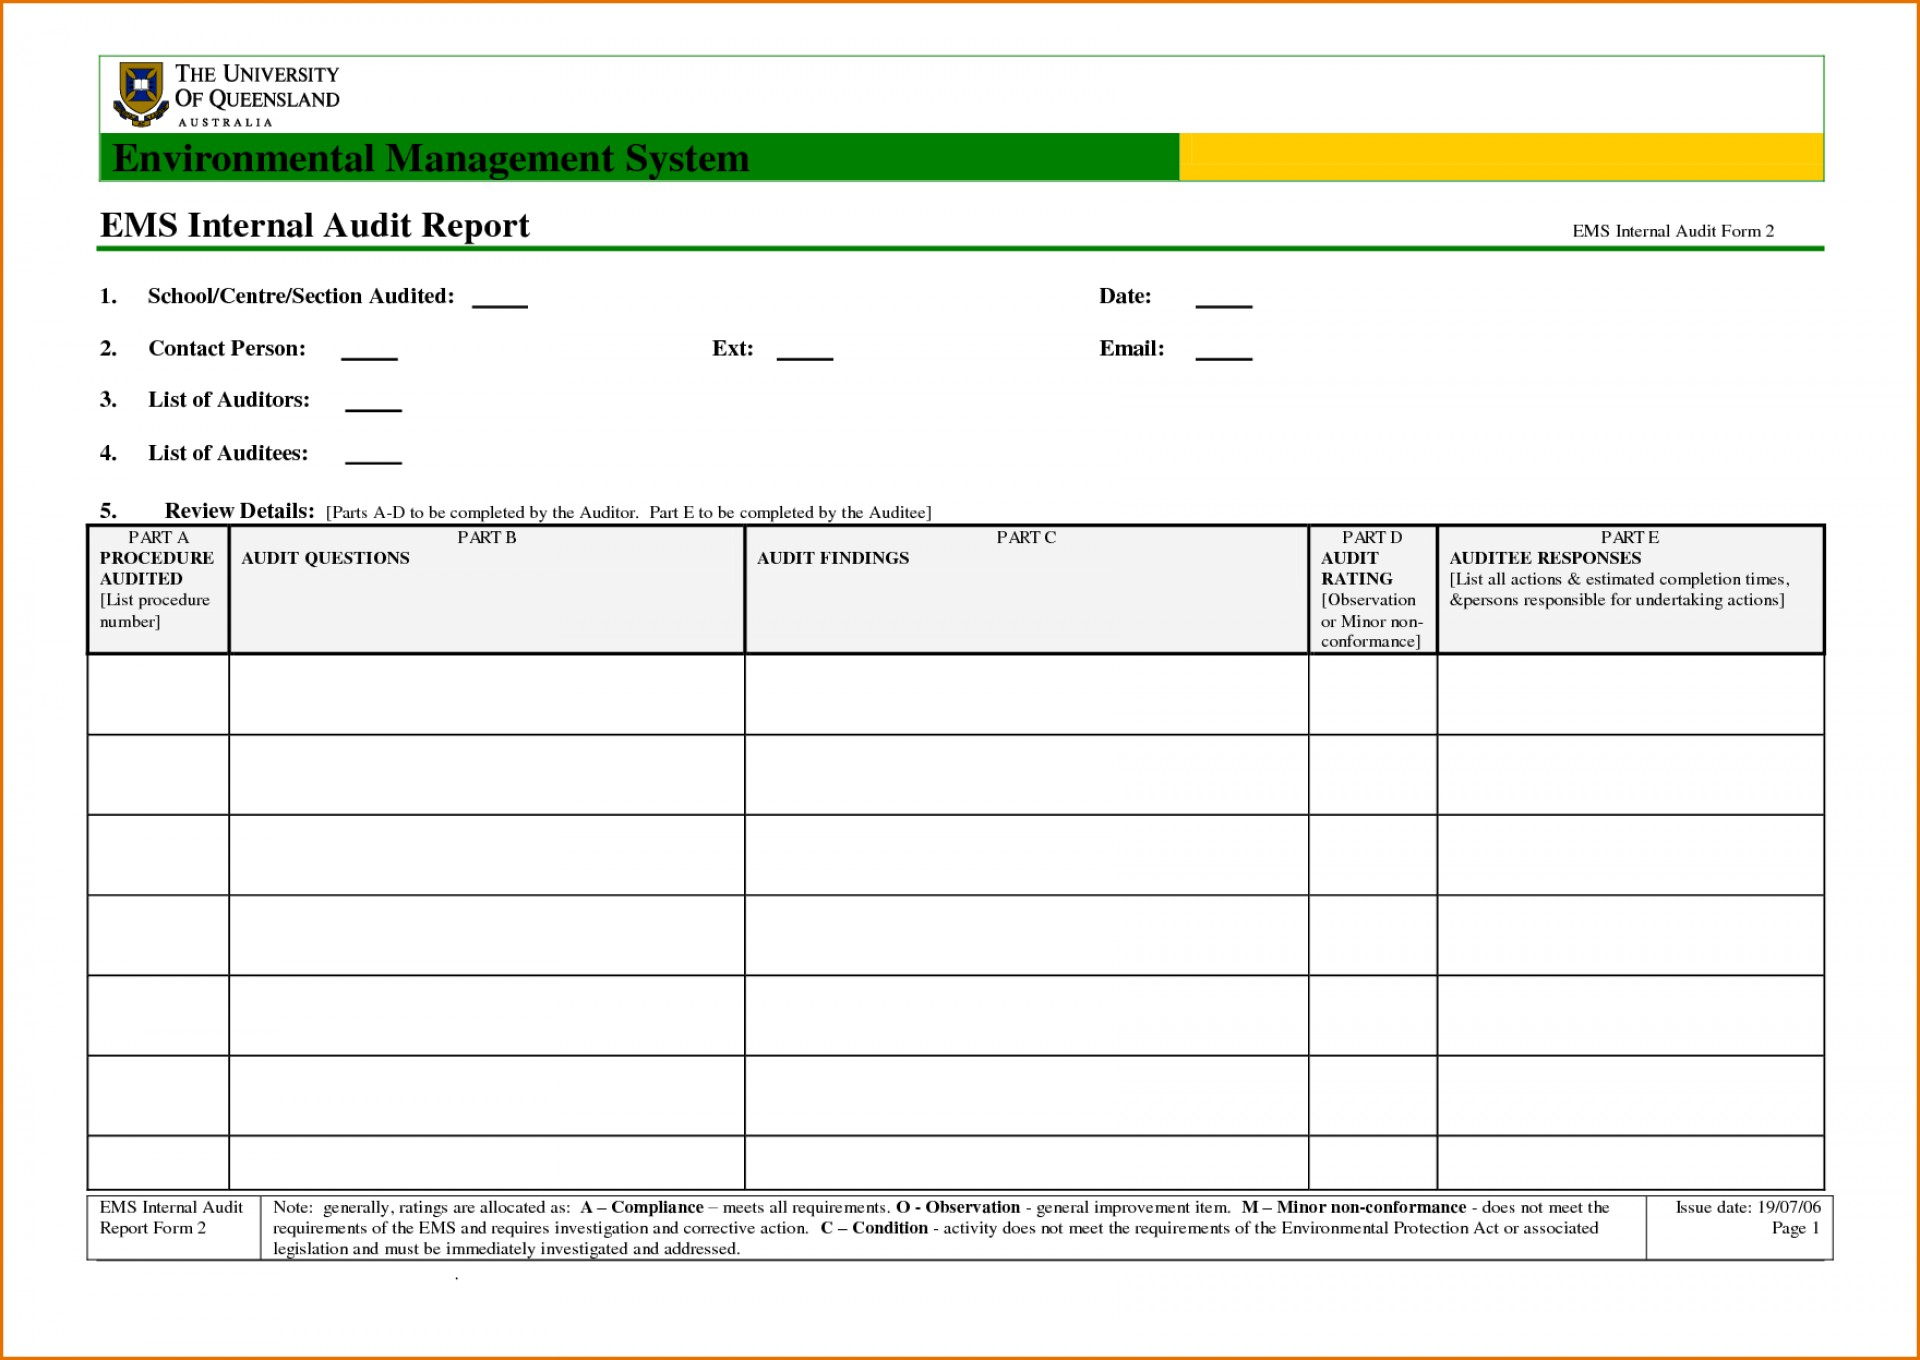 019 Internal Audit Report Template Sample Kairo 9Terrains Co With Audit Findings Report Template